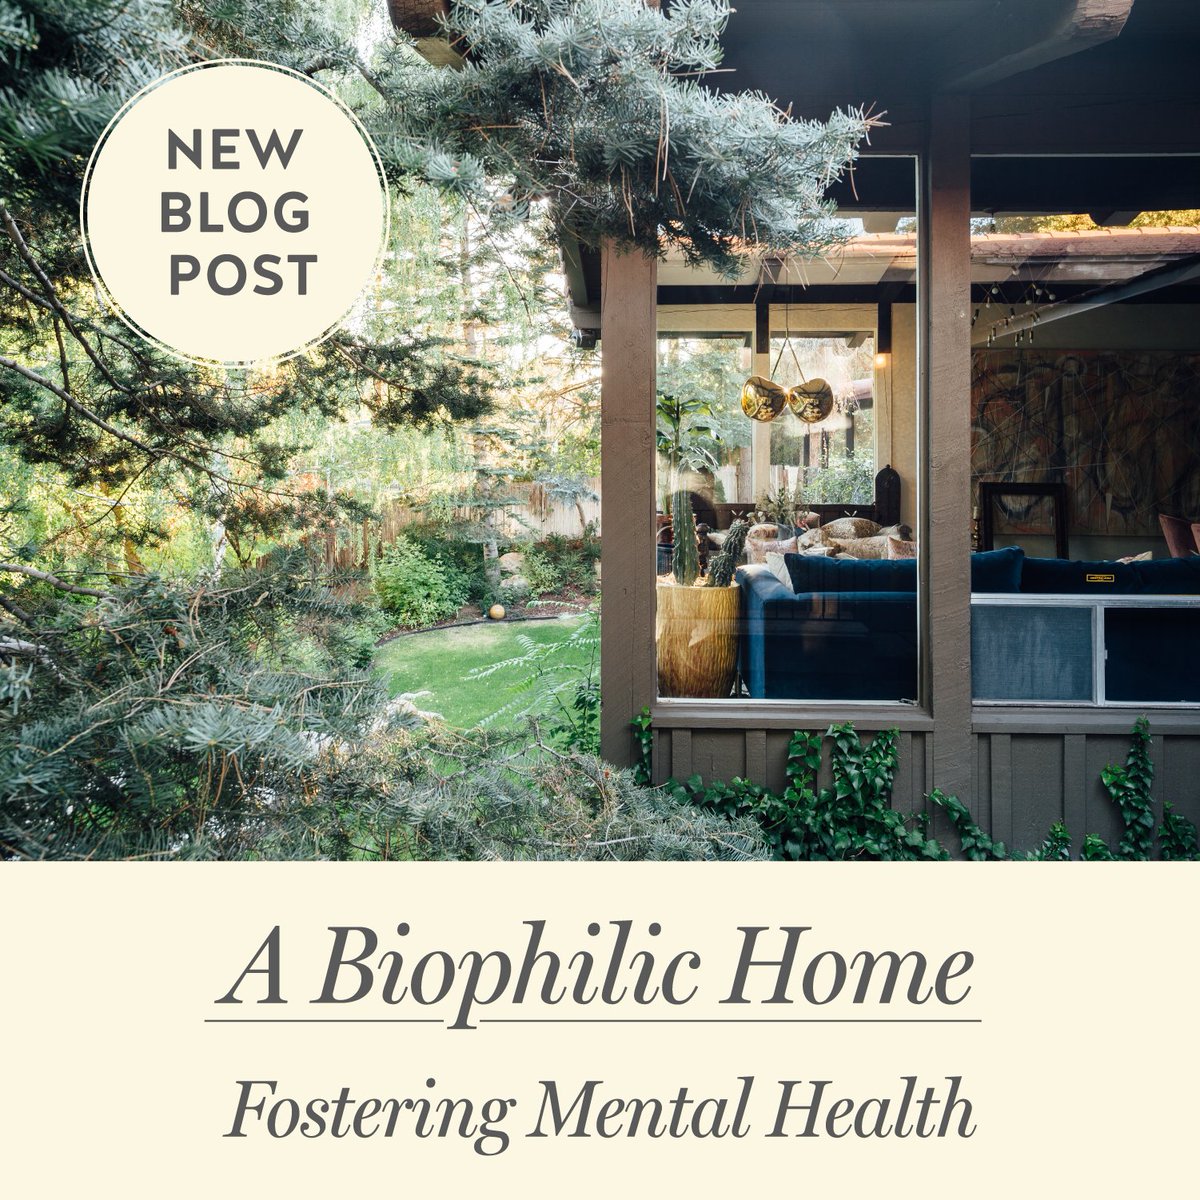 #biophilicdesign #biophilichome fostering #mentalhealth and #wellbeing. Read our new blog post: omniself.care/blog/a-biophil…

#naturetherapy #interiordesign #builtenvironment #healthydwelling #biophilichome #selfcare